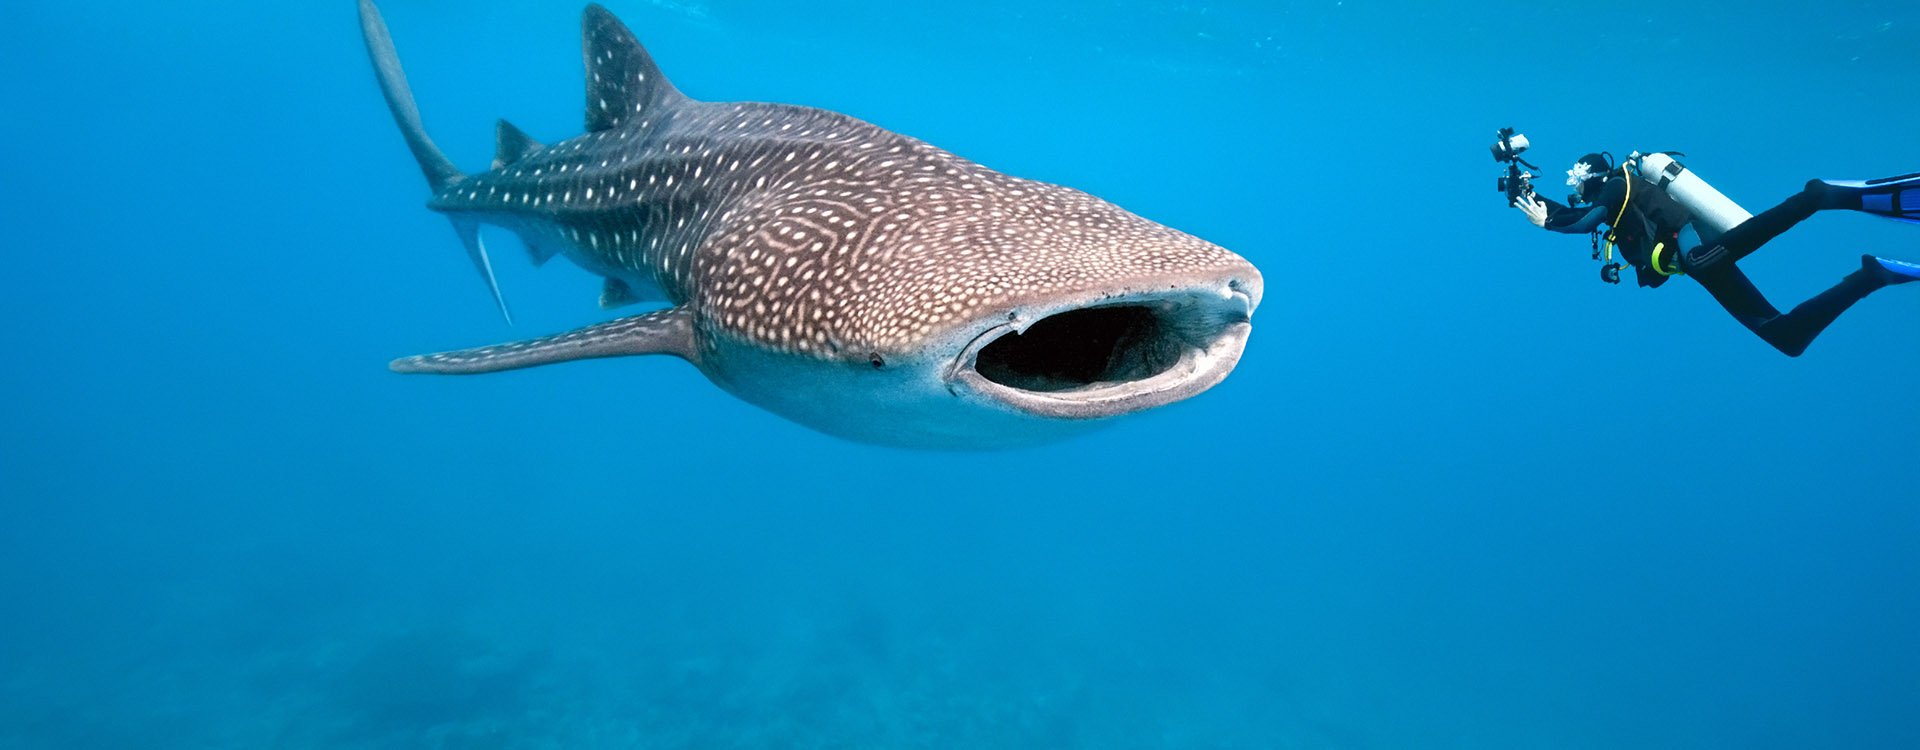 Whale Shark and underwater photographer